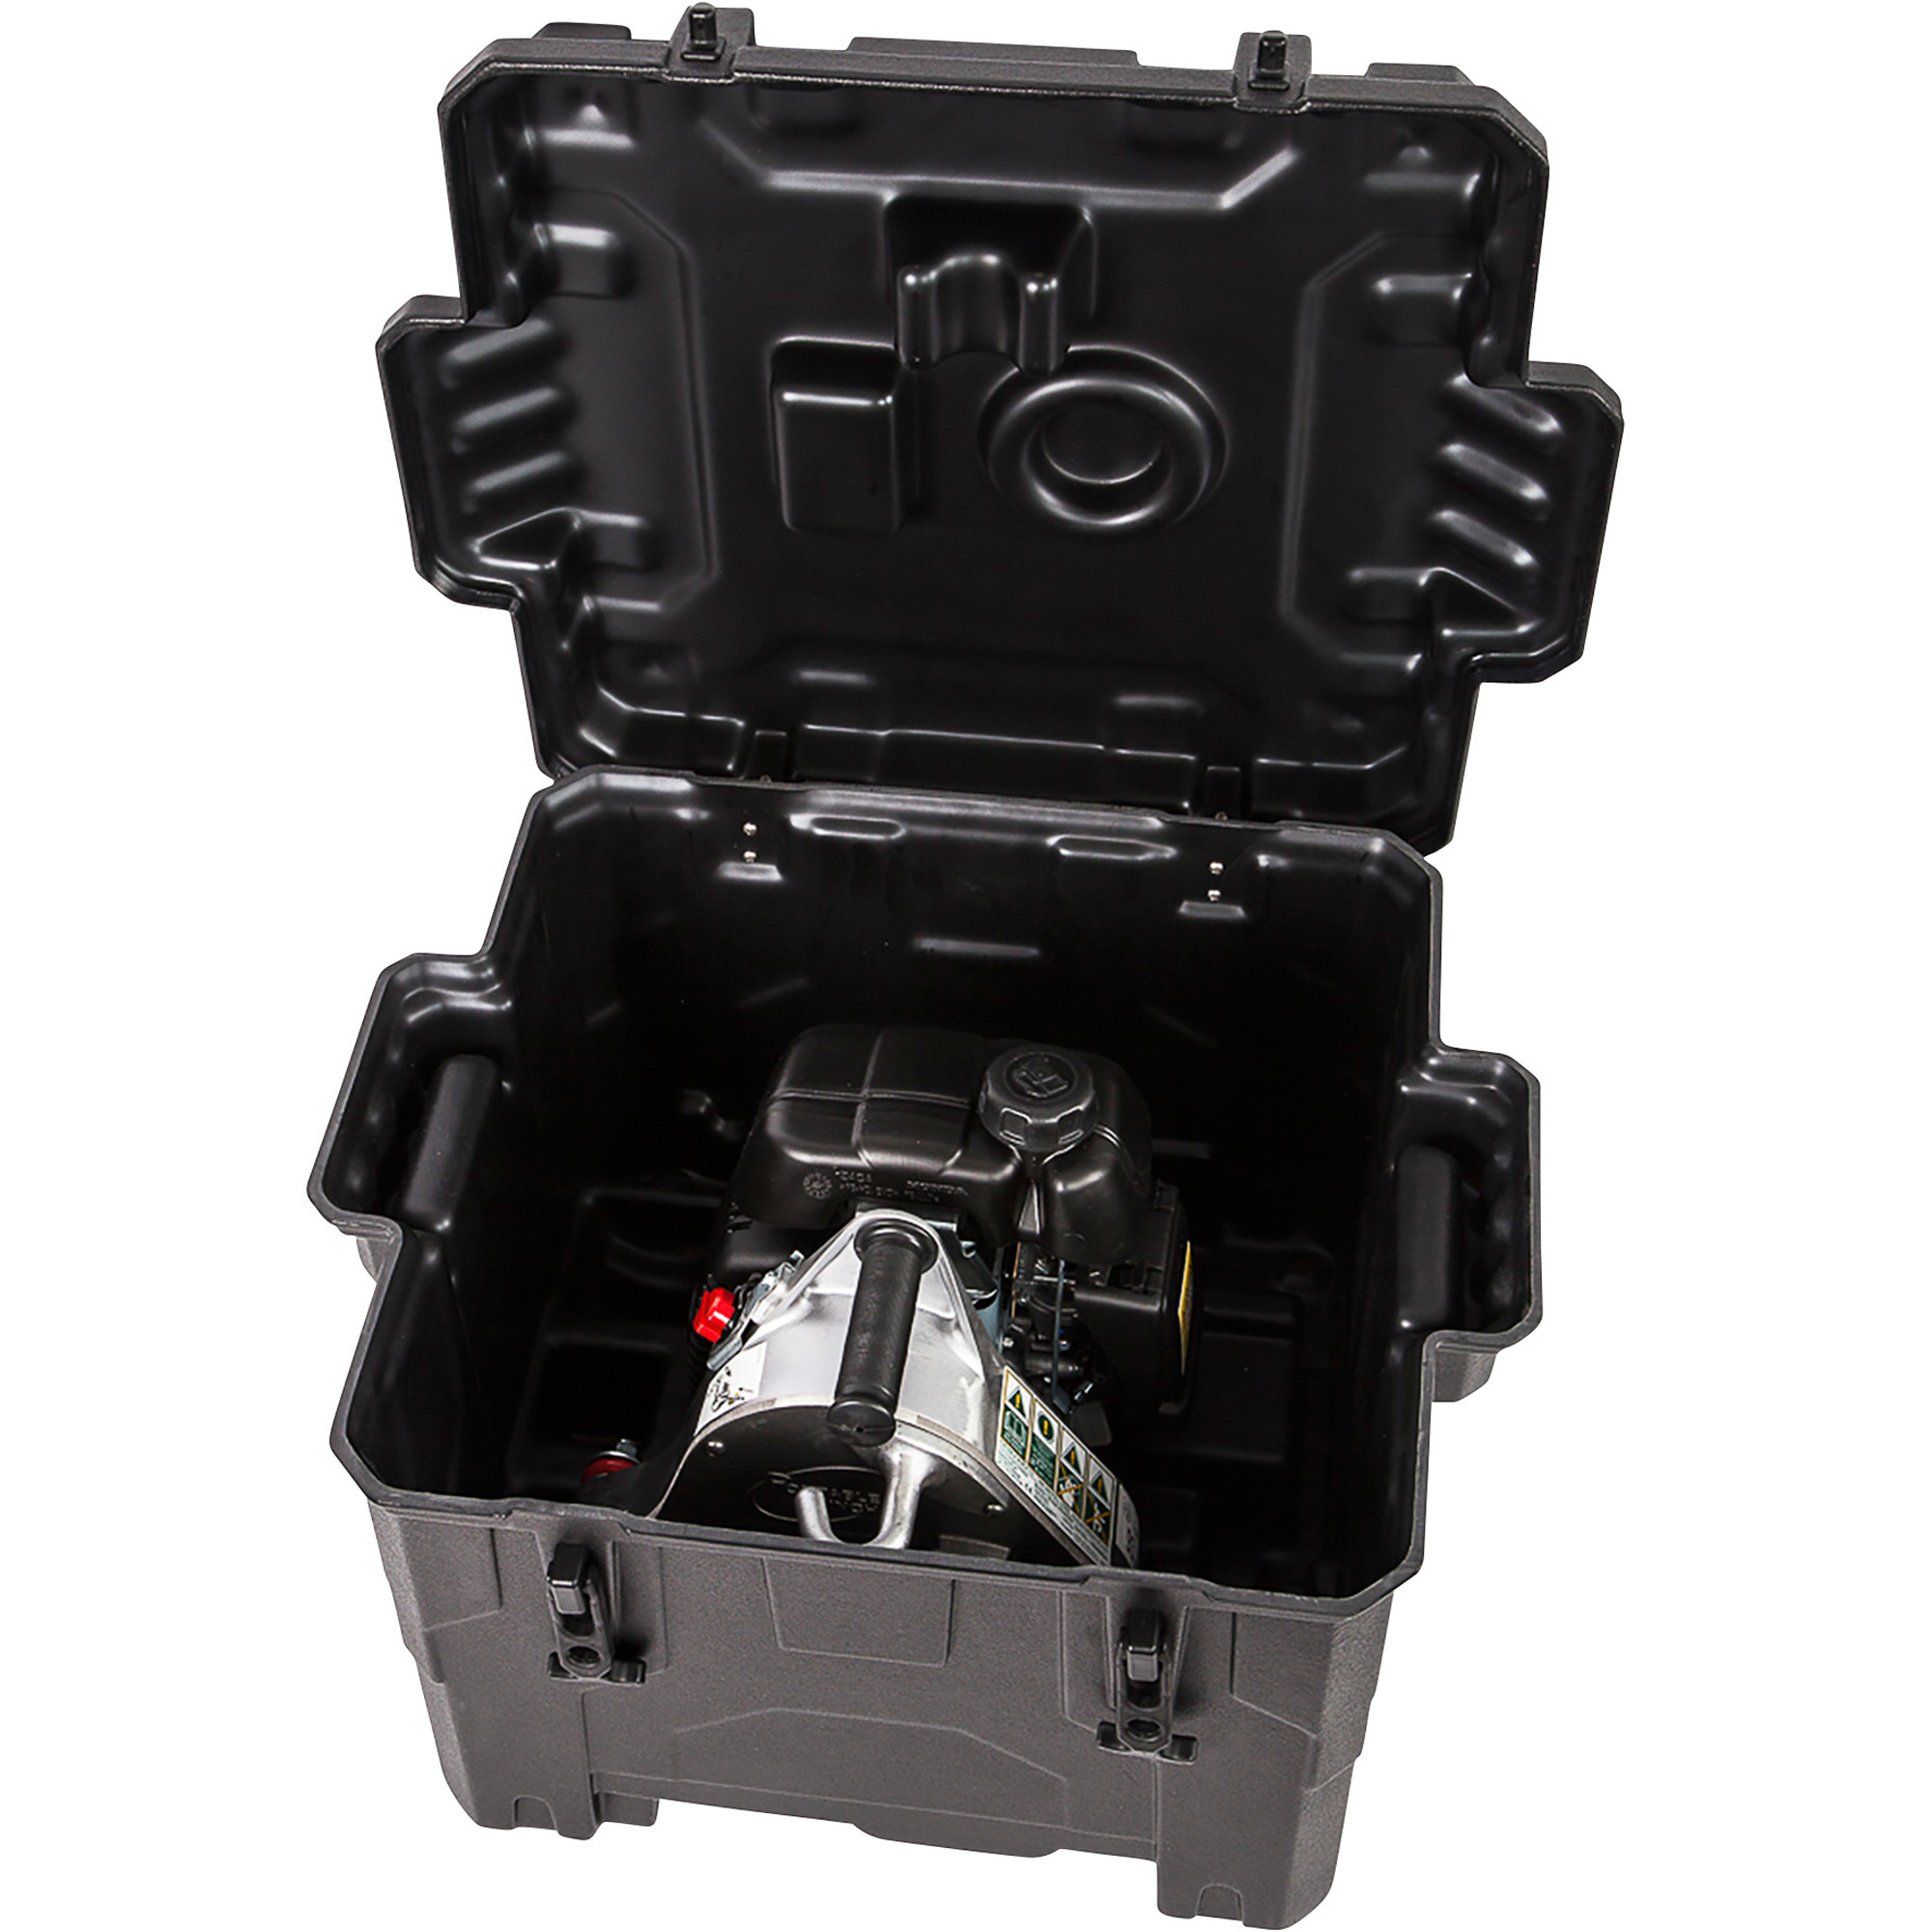 Portable Winch Case for Portable Winch and Accessories, Model PCA-0100